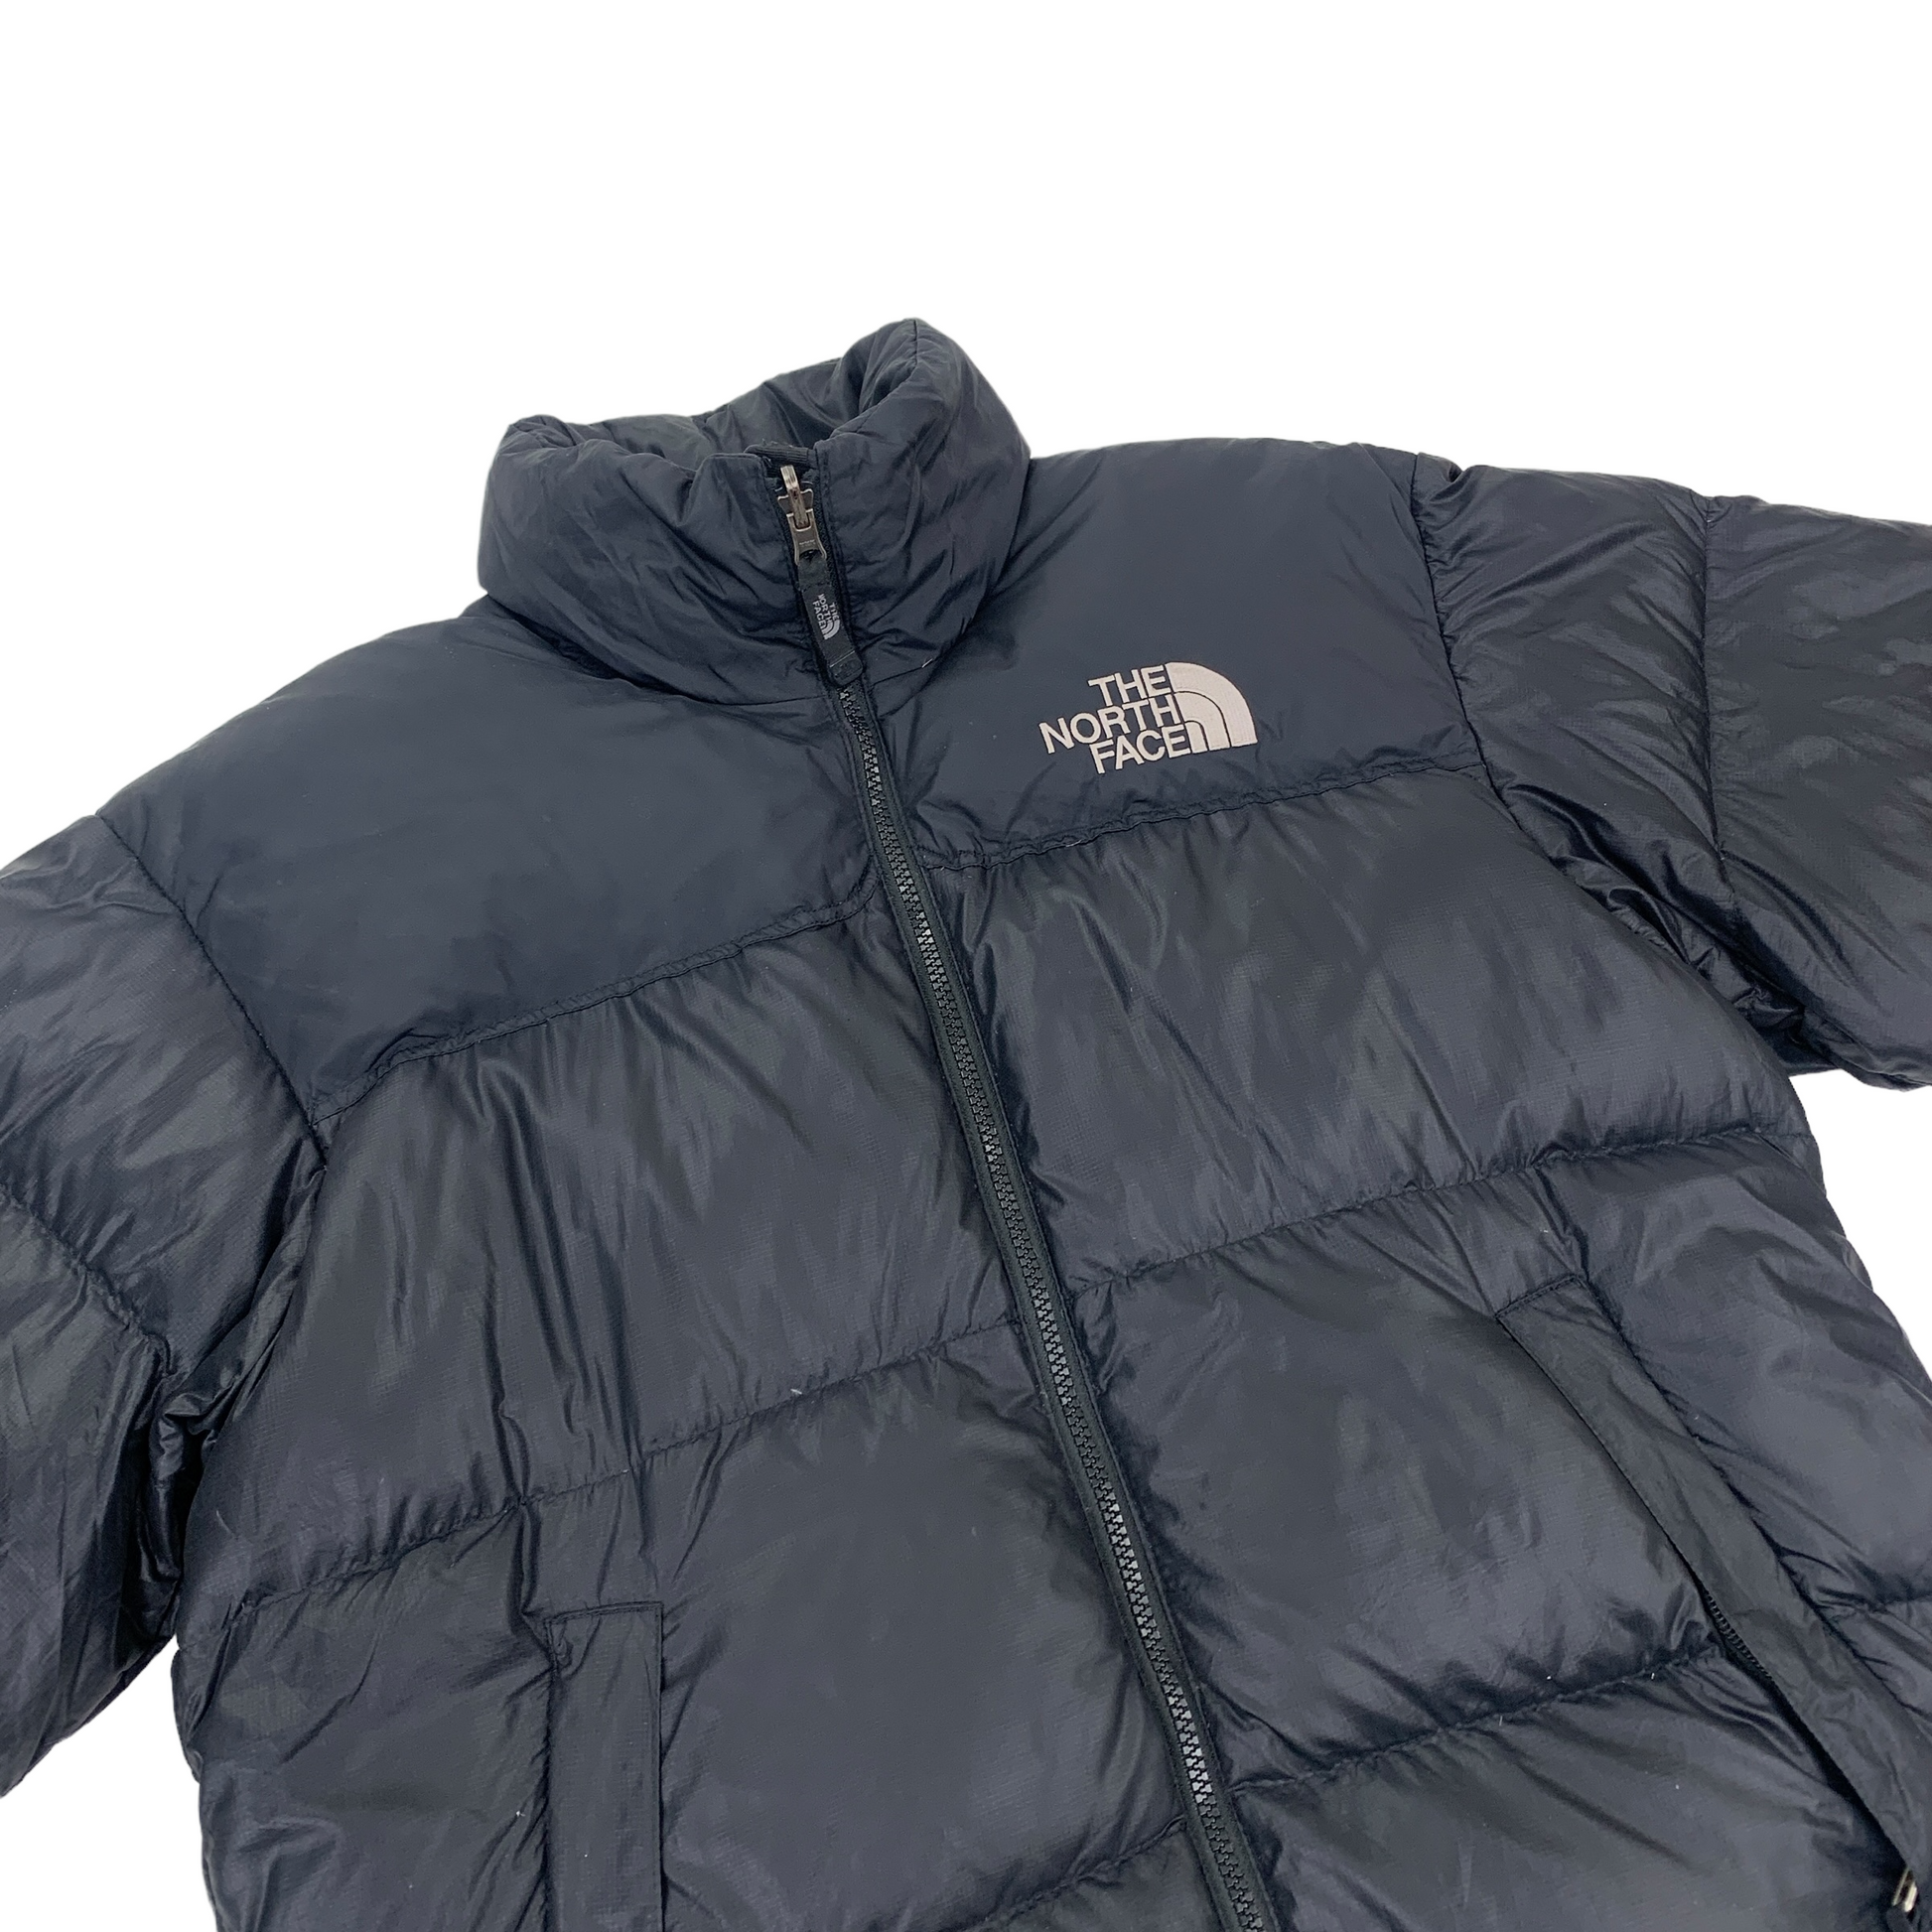 The North Face 700 Puffer Nuptse 1996 Jacket-pufferseason-1996-winter-secondhand-austria-vintage-sustainable-pre-owned-deal-sale-nuptse-puffer-down-coat